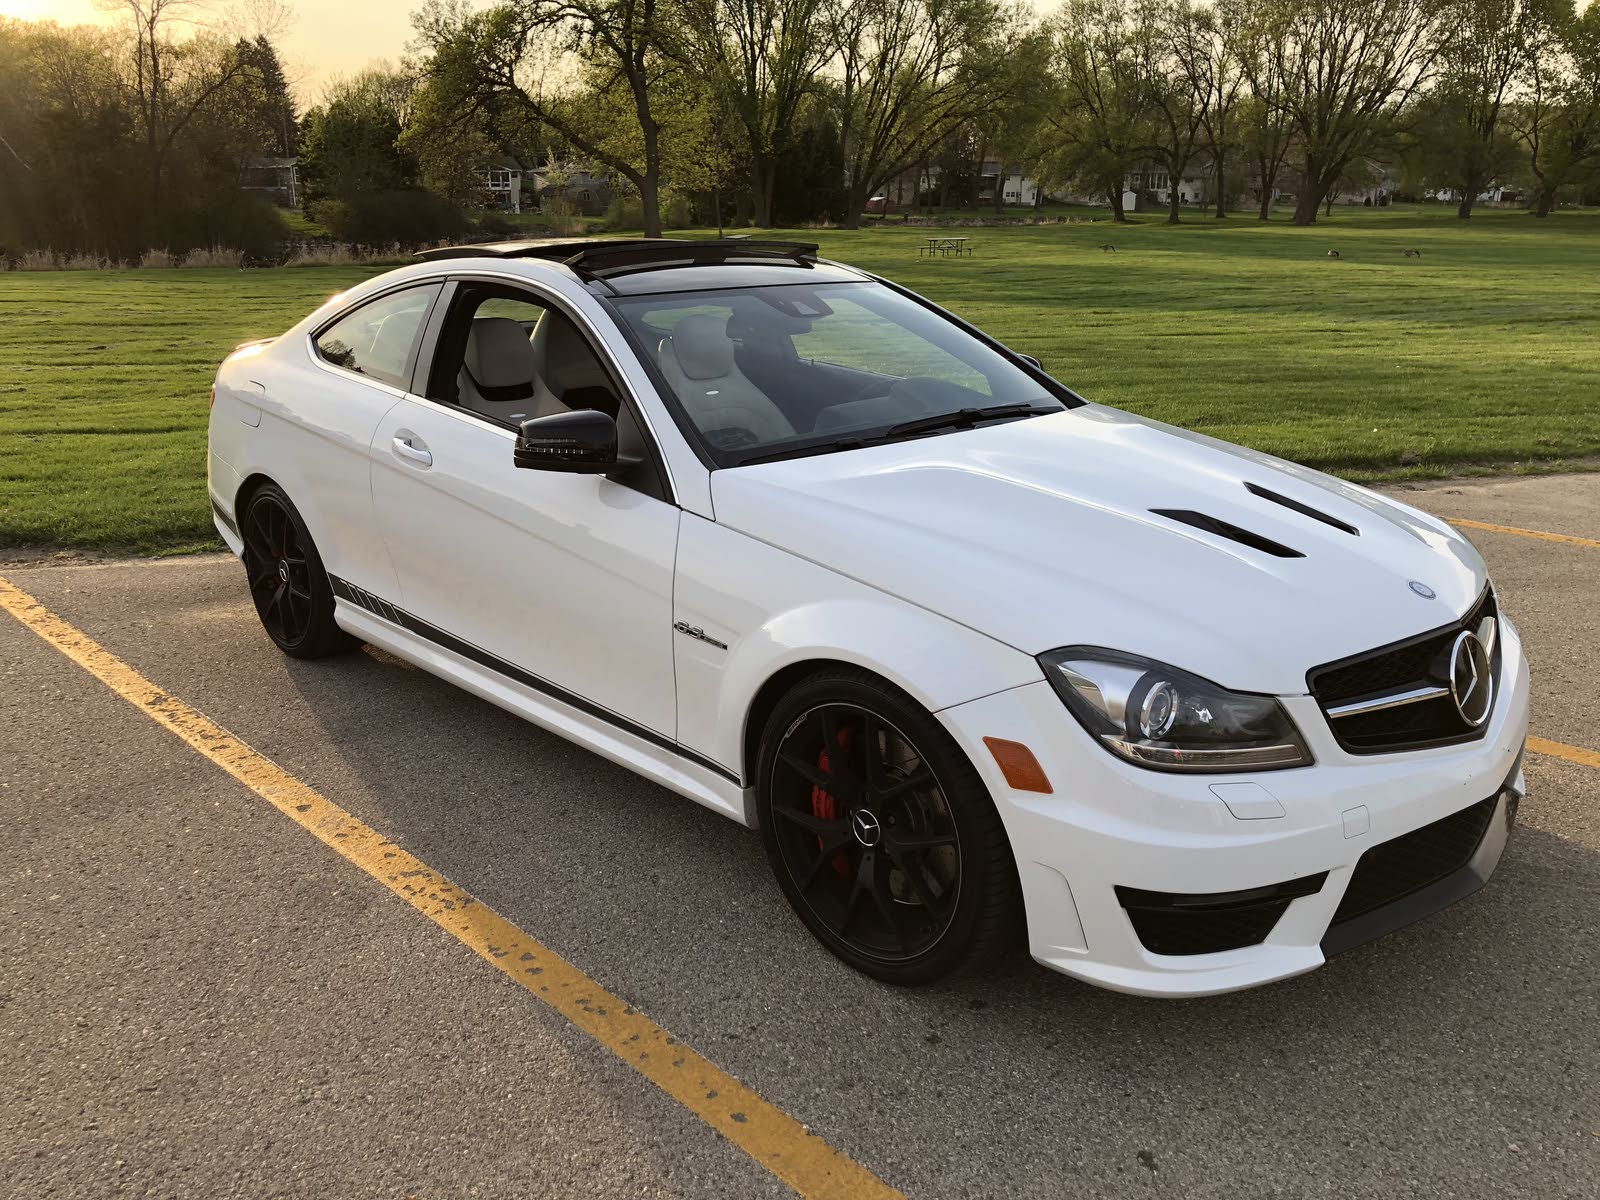 Mercedes Benz C Class Questions Anyone Interesting To Buy Merceds Benz C63 Amg Edition 507 Mileage 31 Cargurus